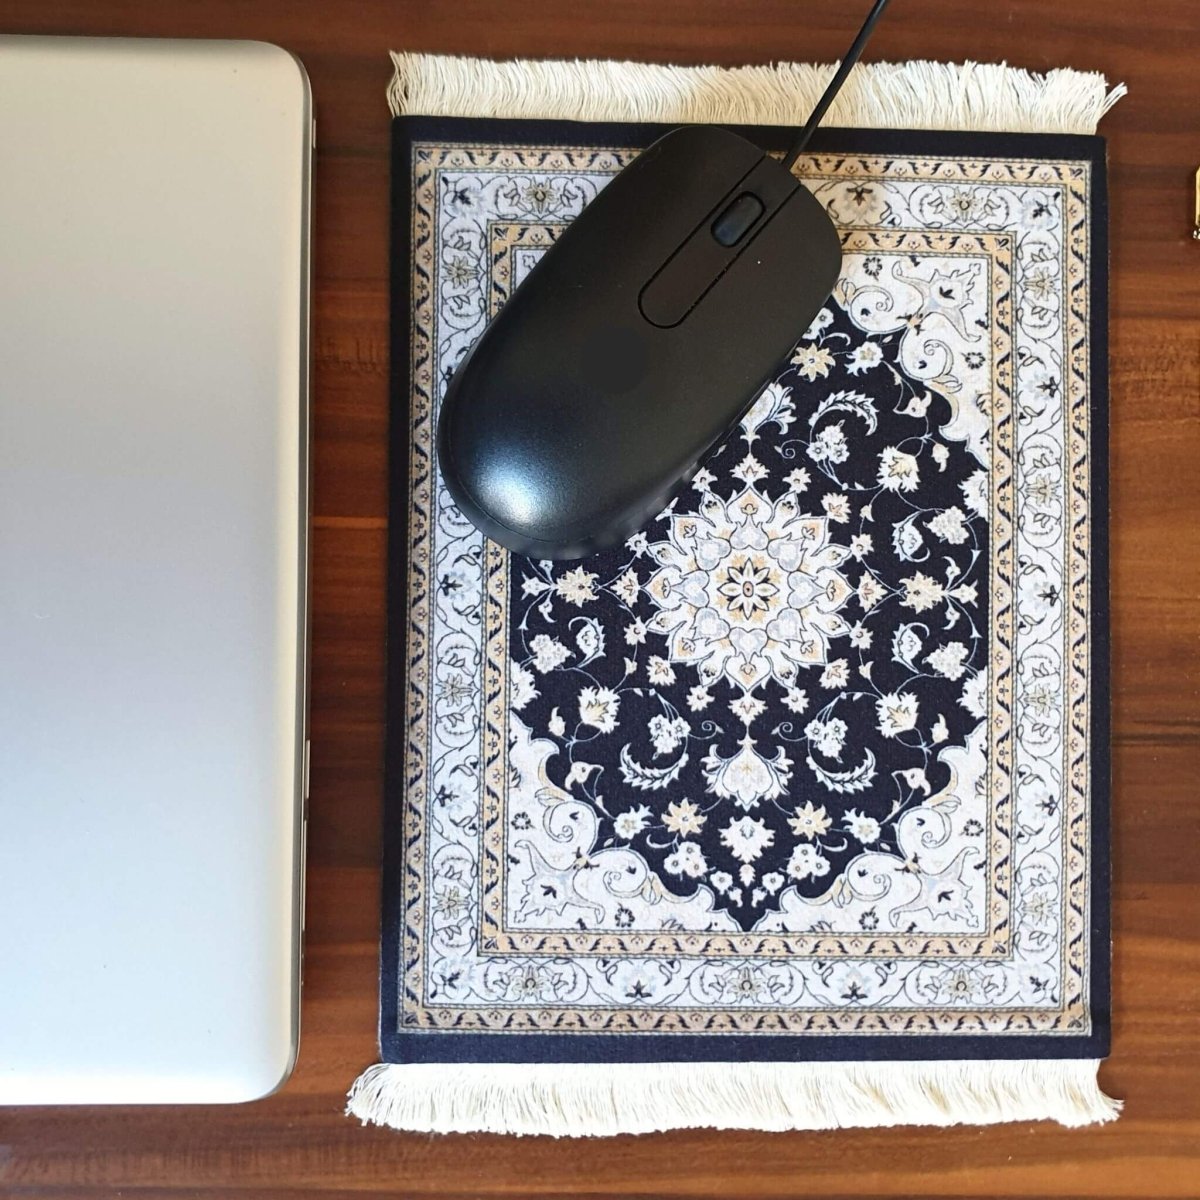 Mini rug shaped mouse pad in black and white